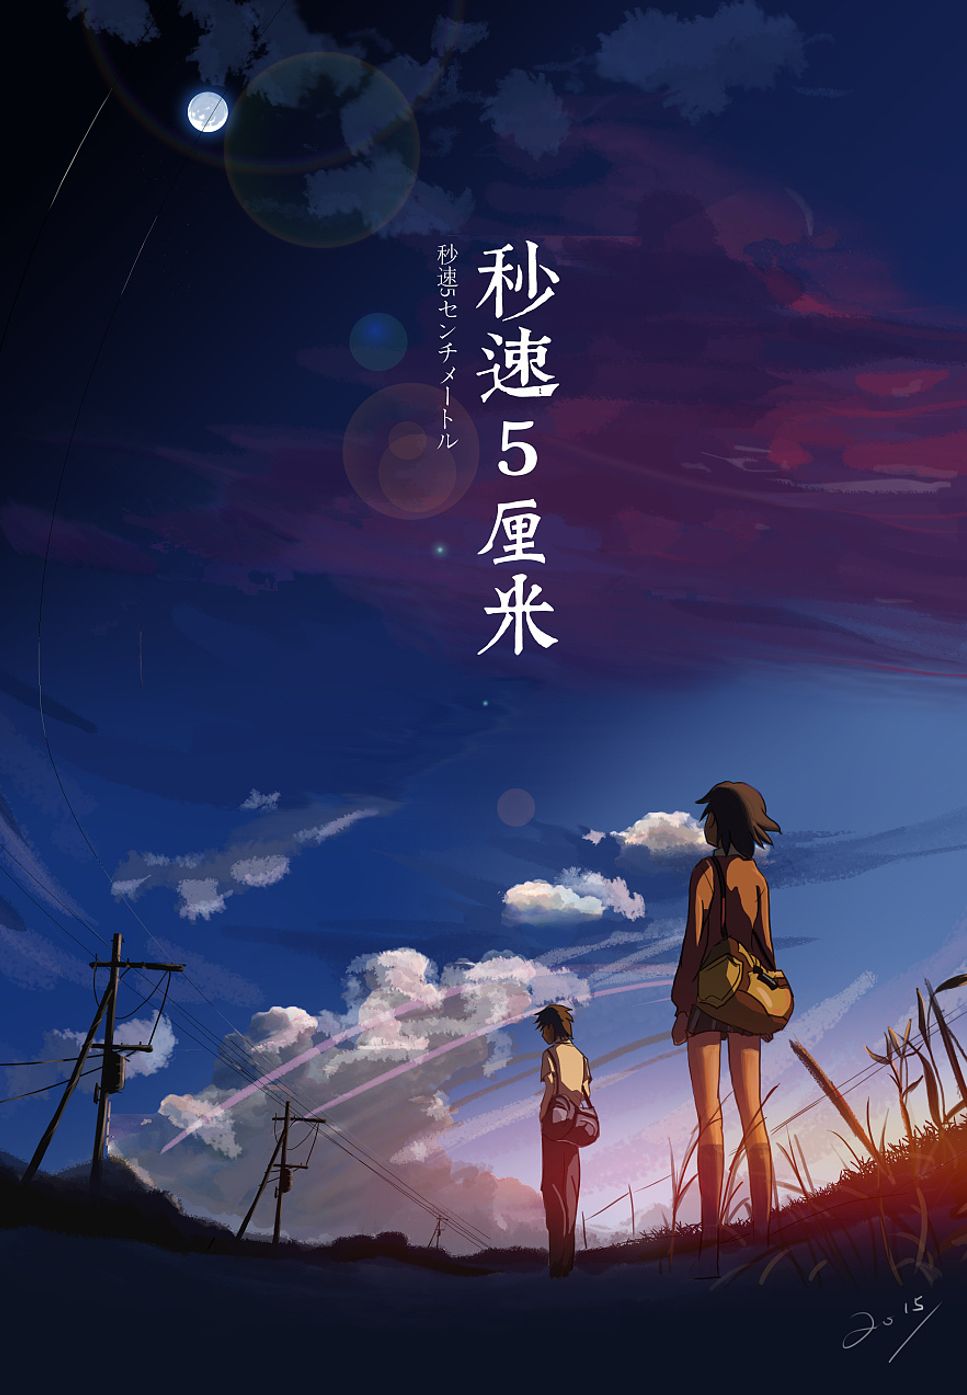 Masayoshi Yamazaki - One More Time One More Chance (From 5 Centimeters per Second,For Piano Solo) by poon